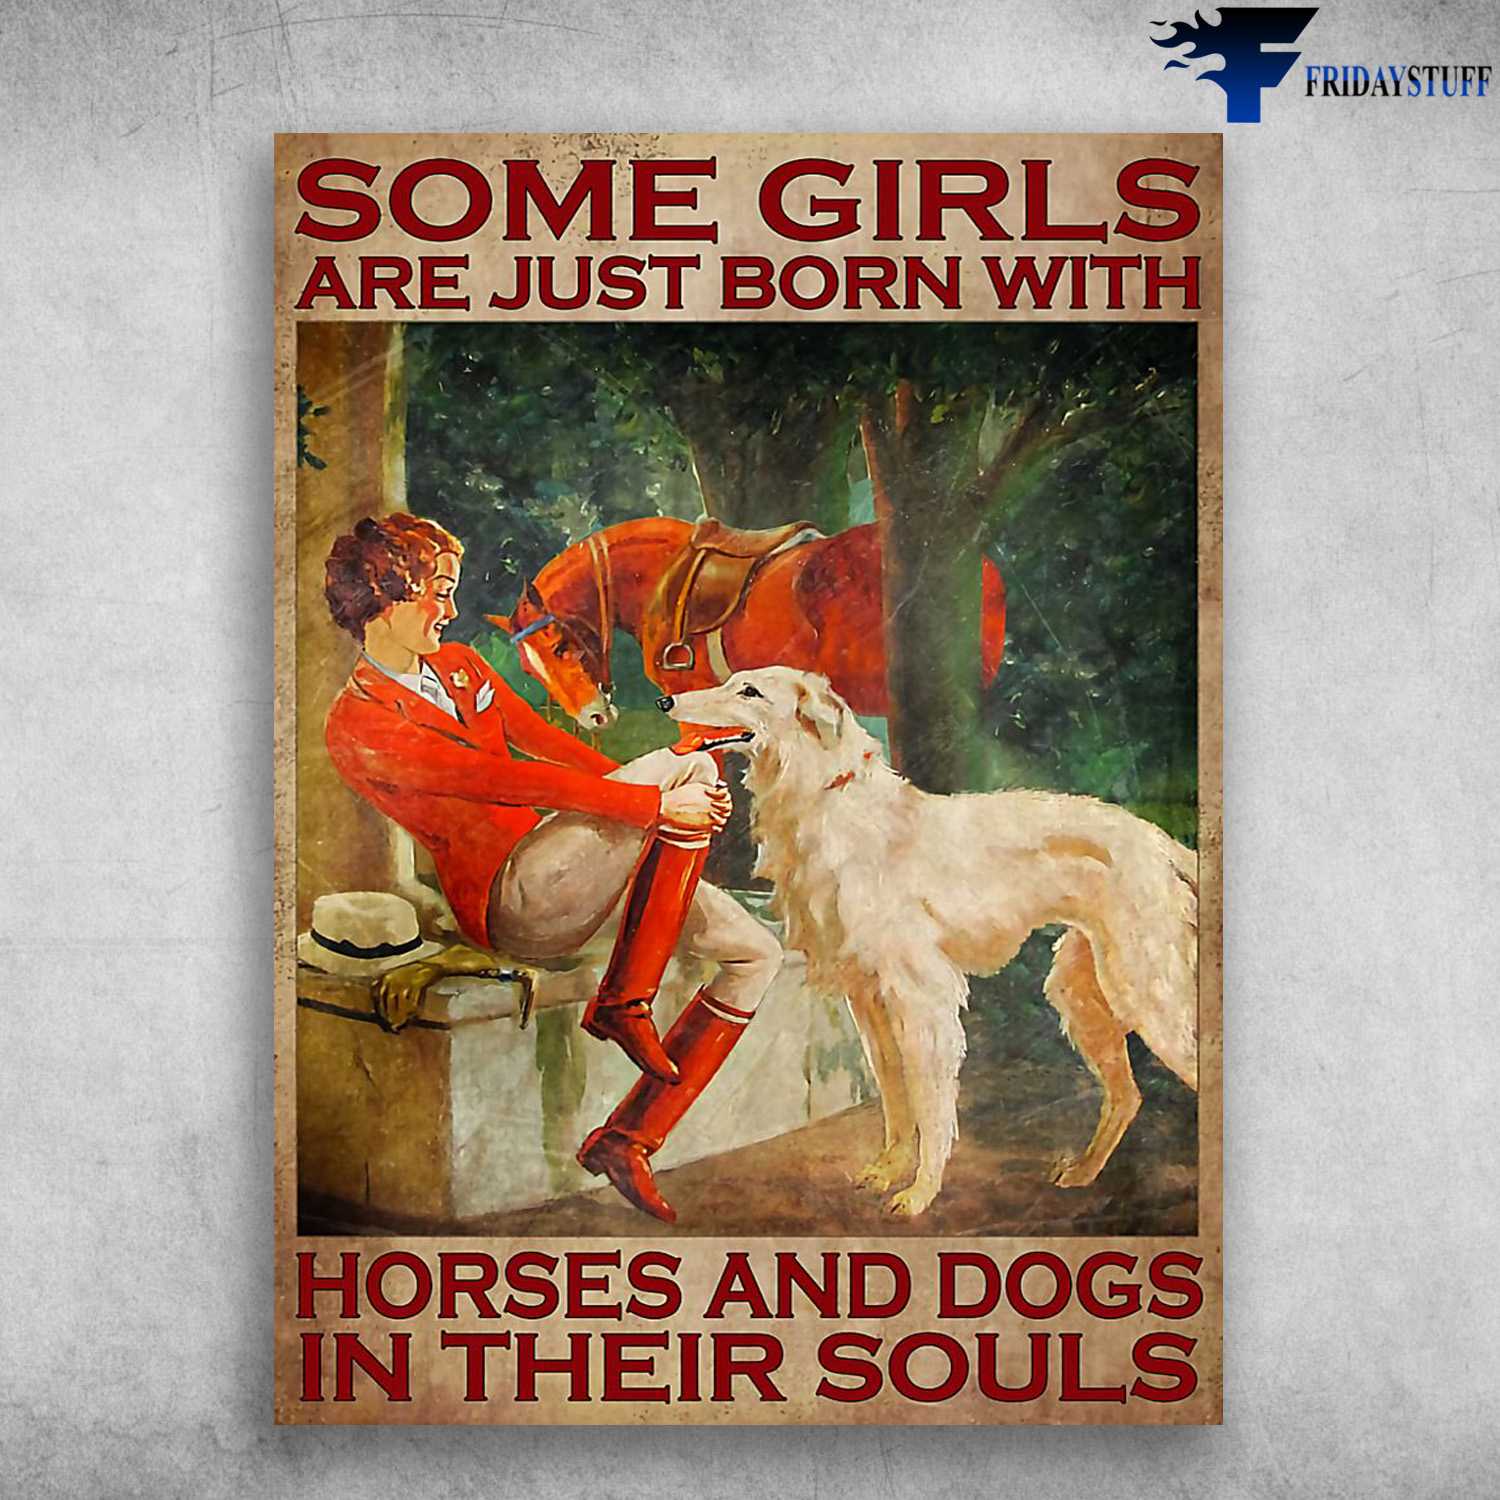 Dog And Horse, Girl Loves Dog, Horse Riding, Some Girls, Are Just Born, With Horses And Dogs, In Their Soul